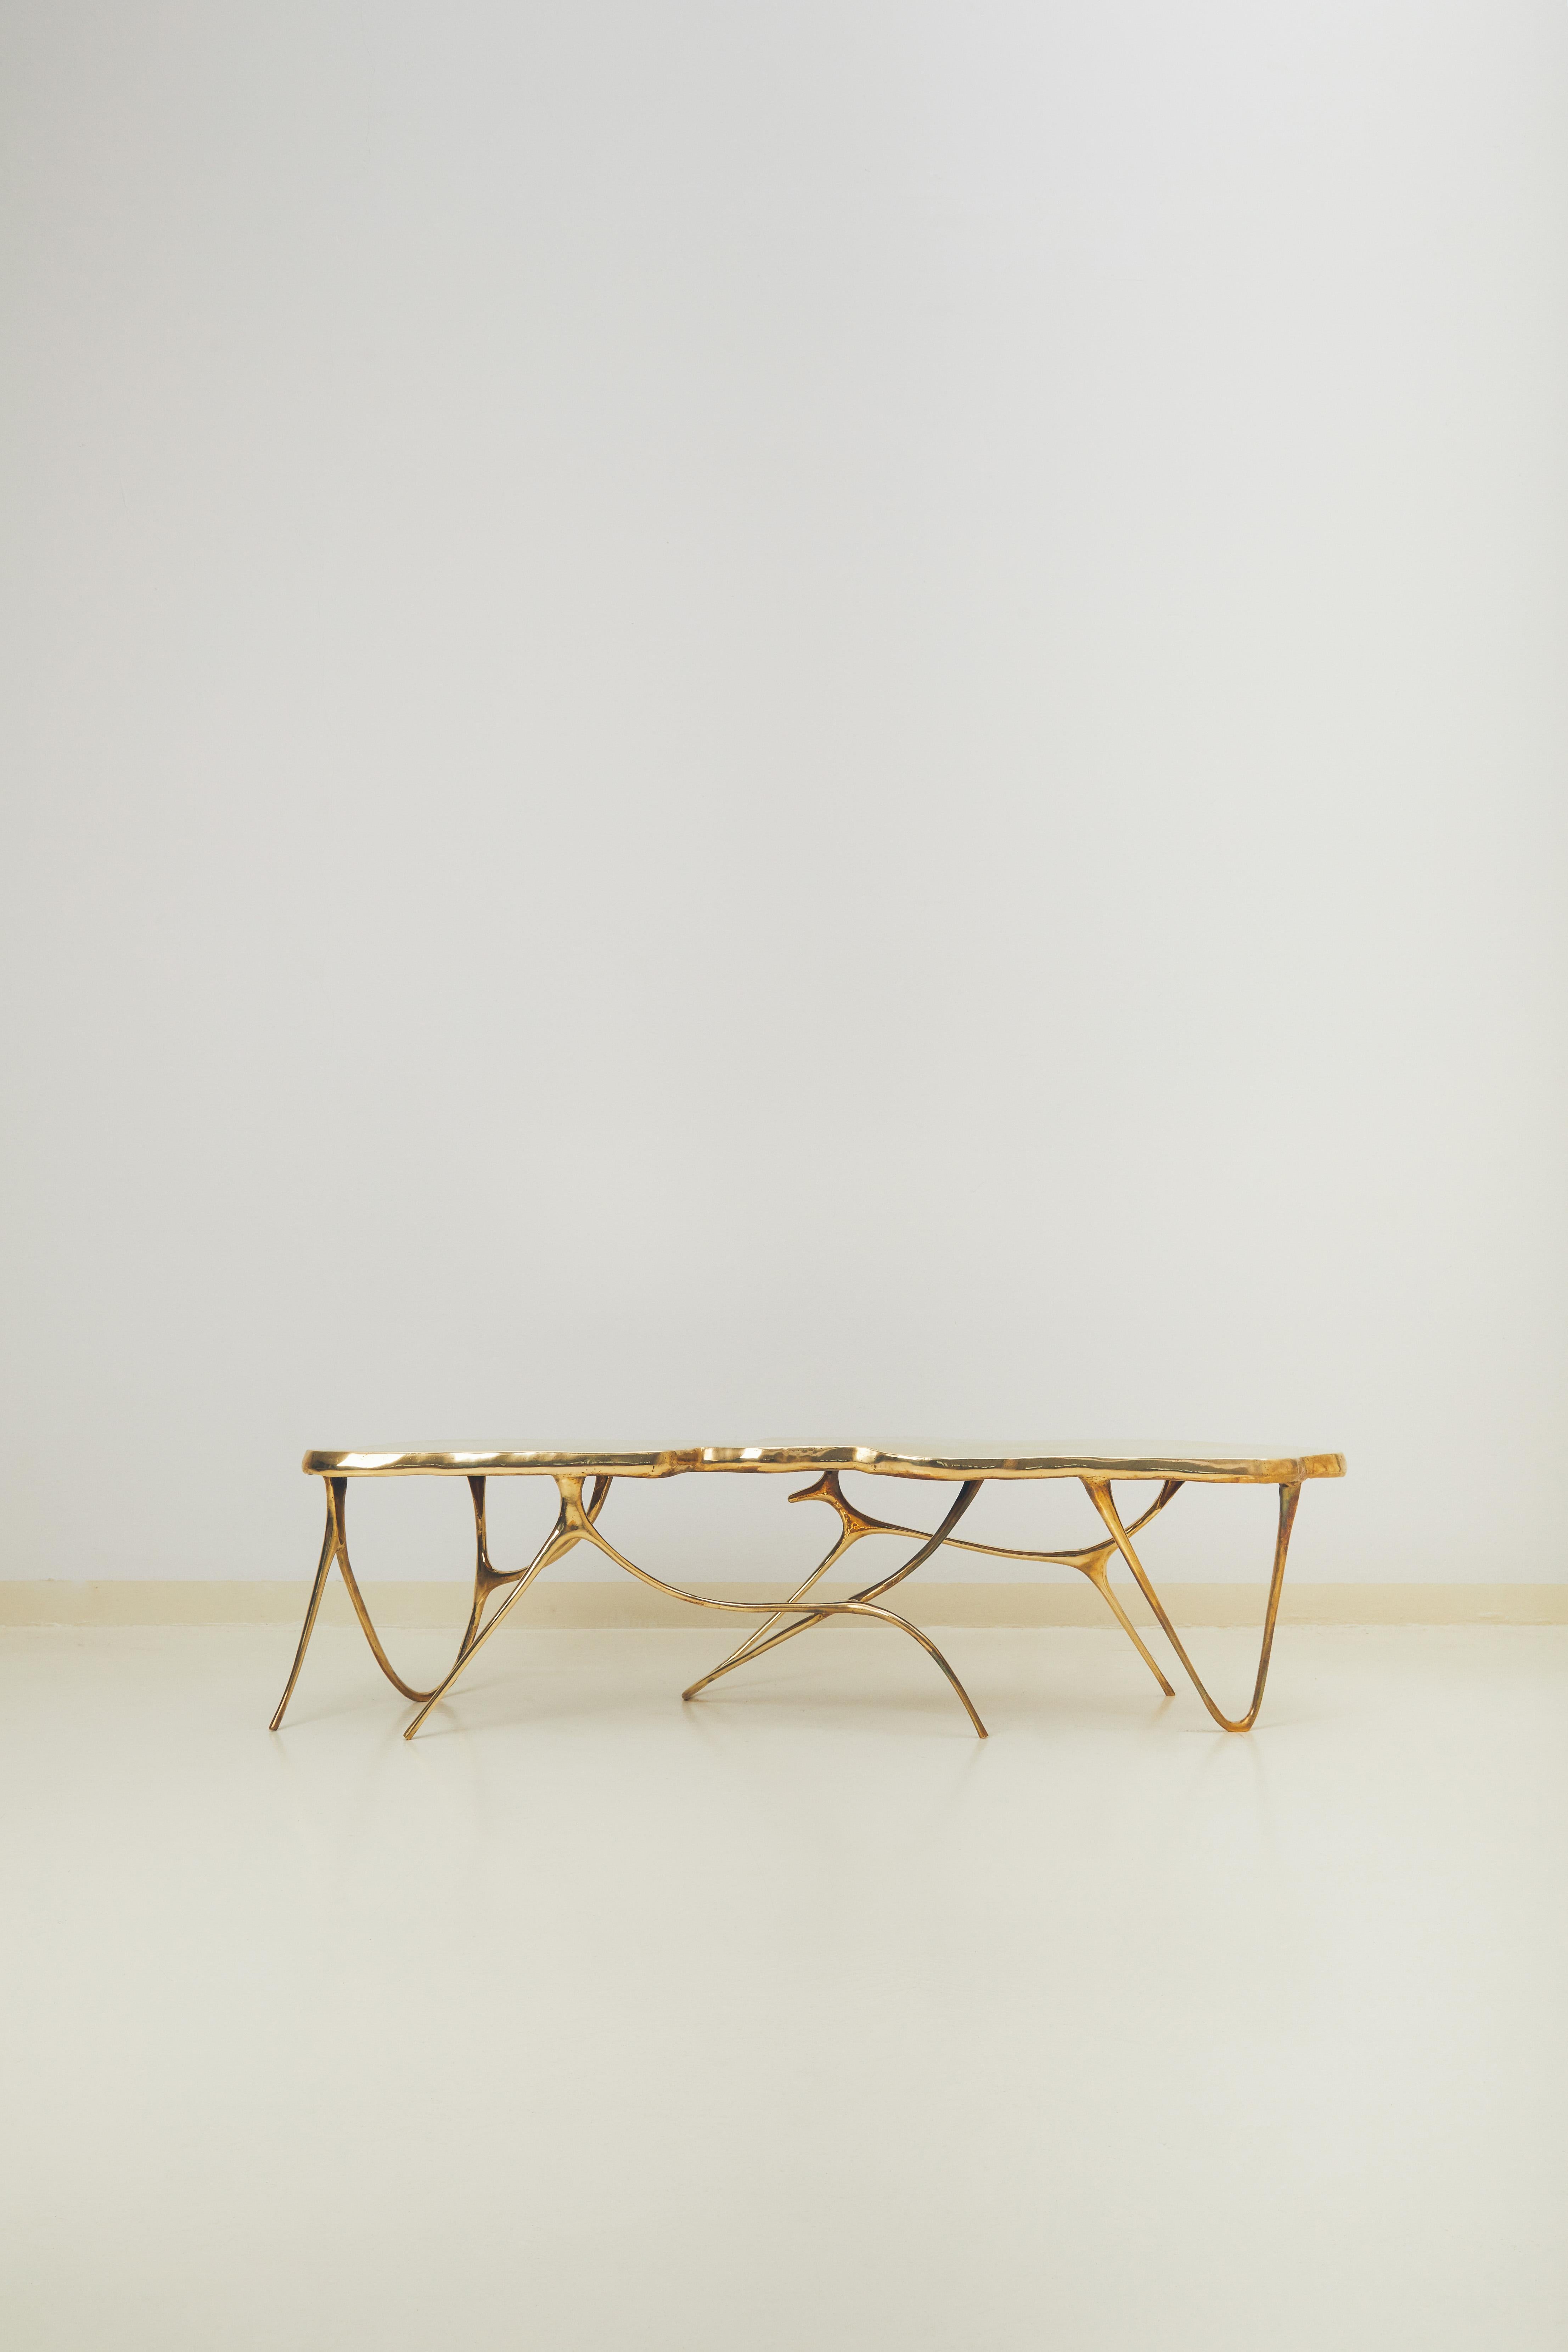 Post-Modern Calligraphic Sculpted Brass Bench by Misaya For Sale